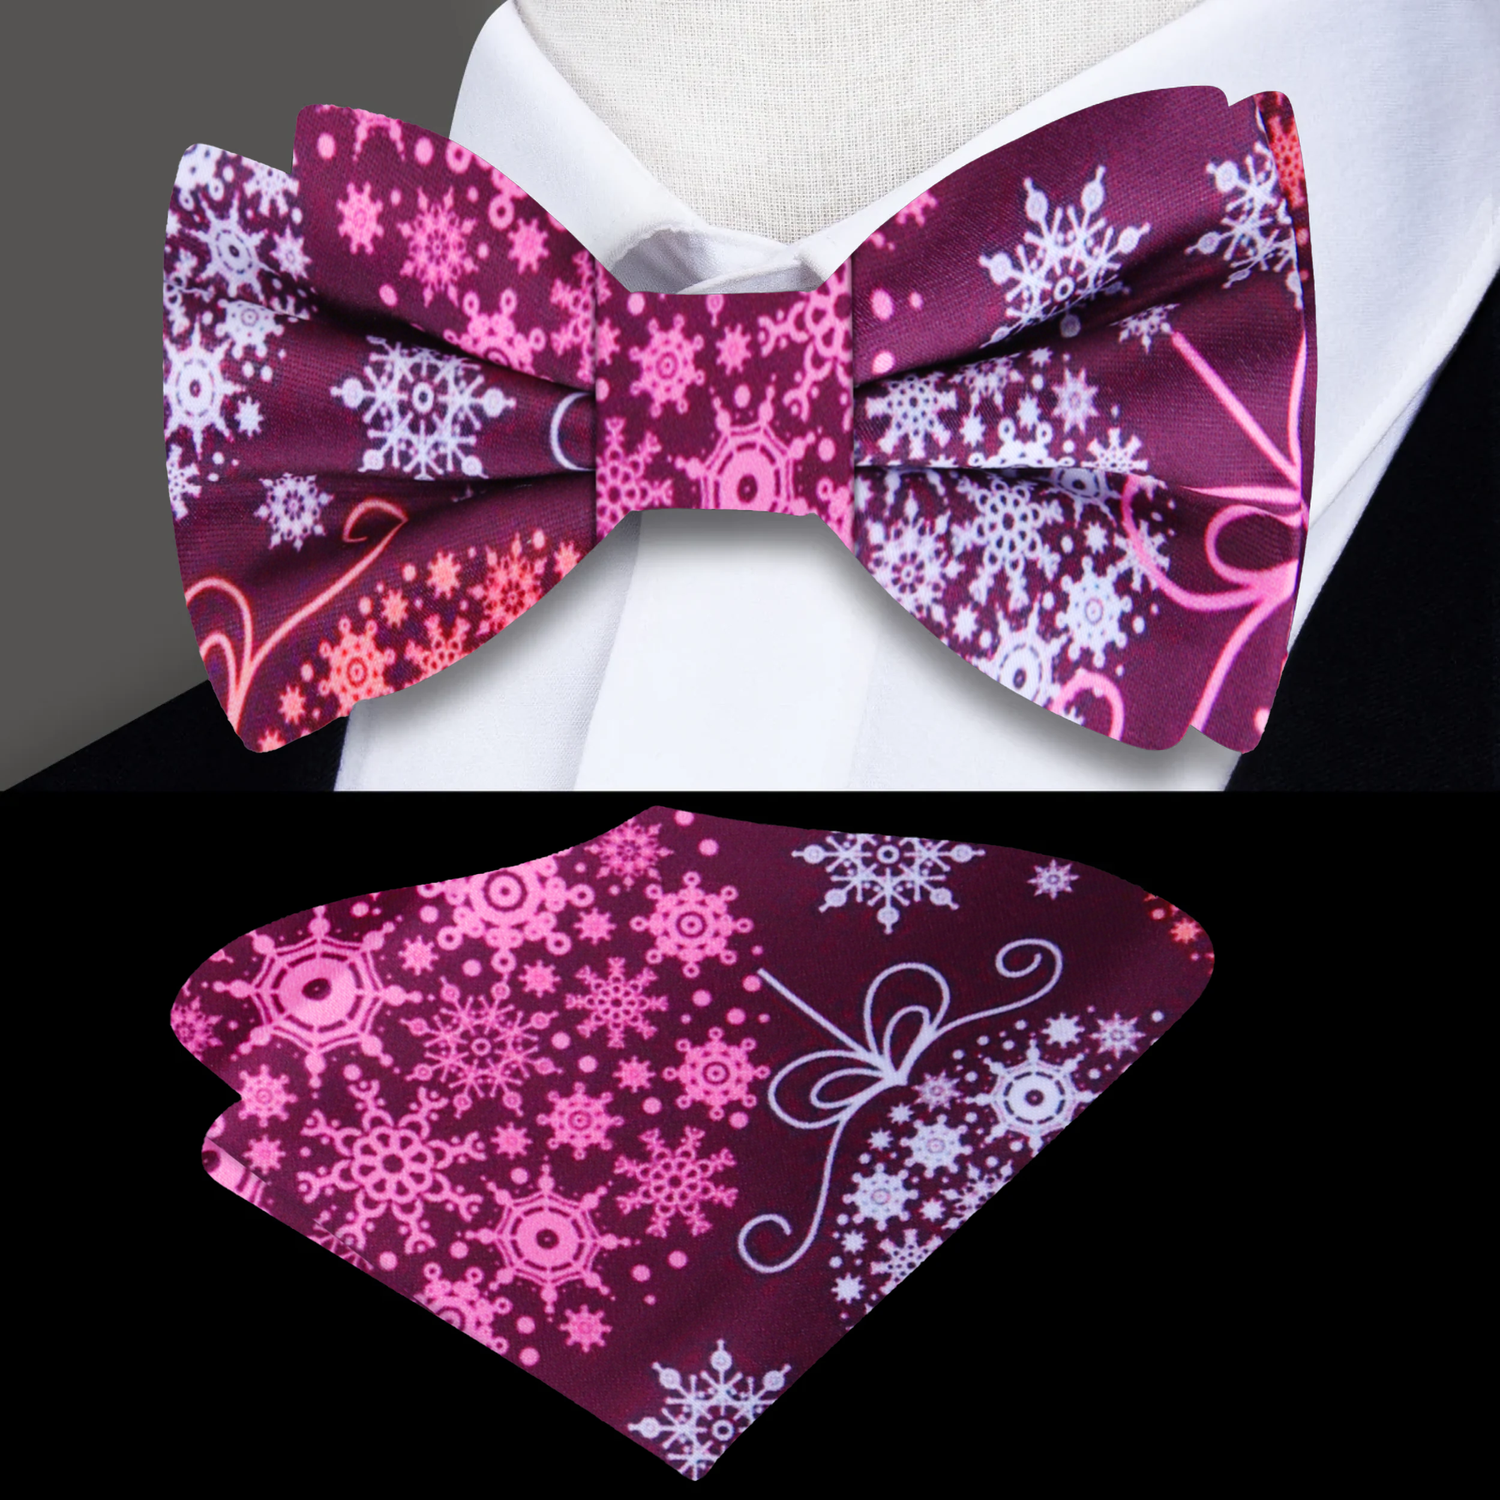 Plum, Pink, White Large Christmas Ornaments Bow Tie and Pocket Square